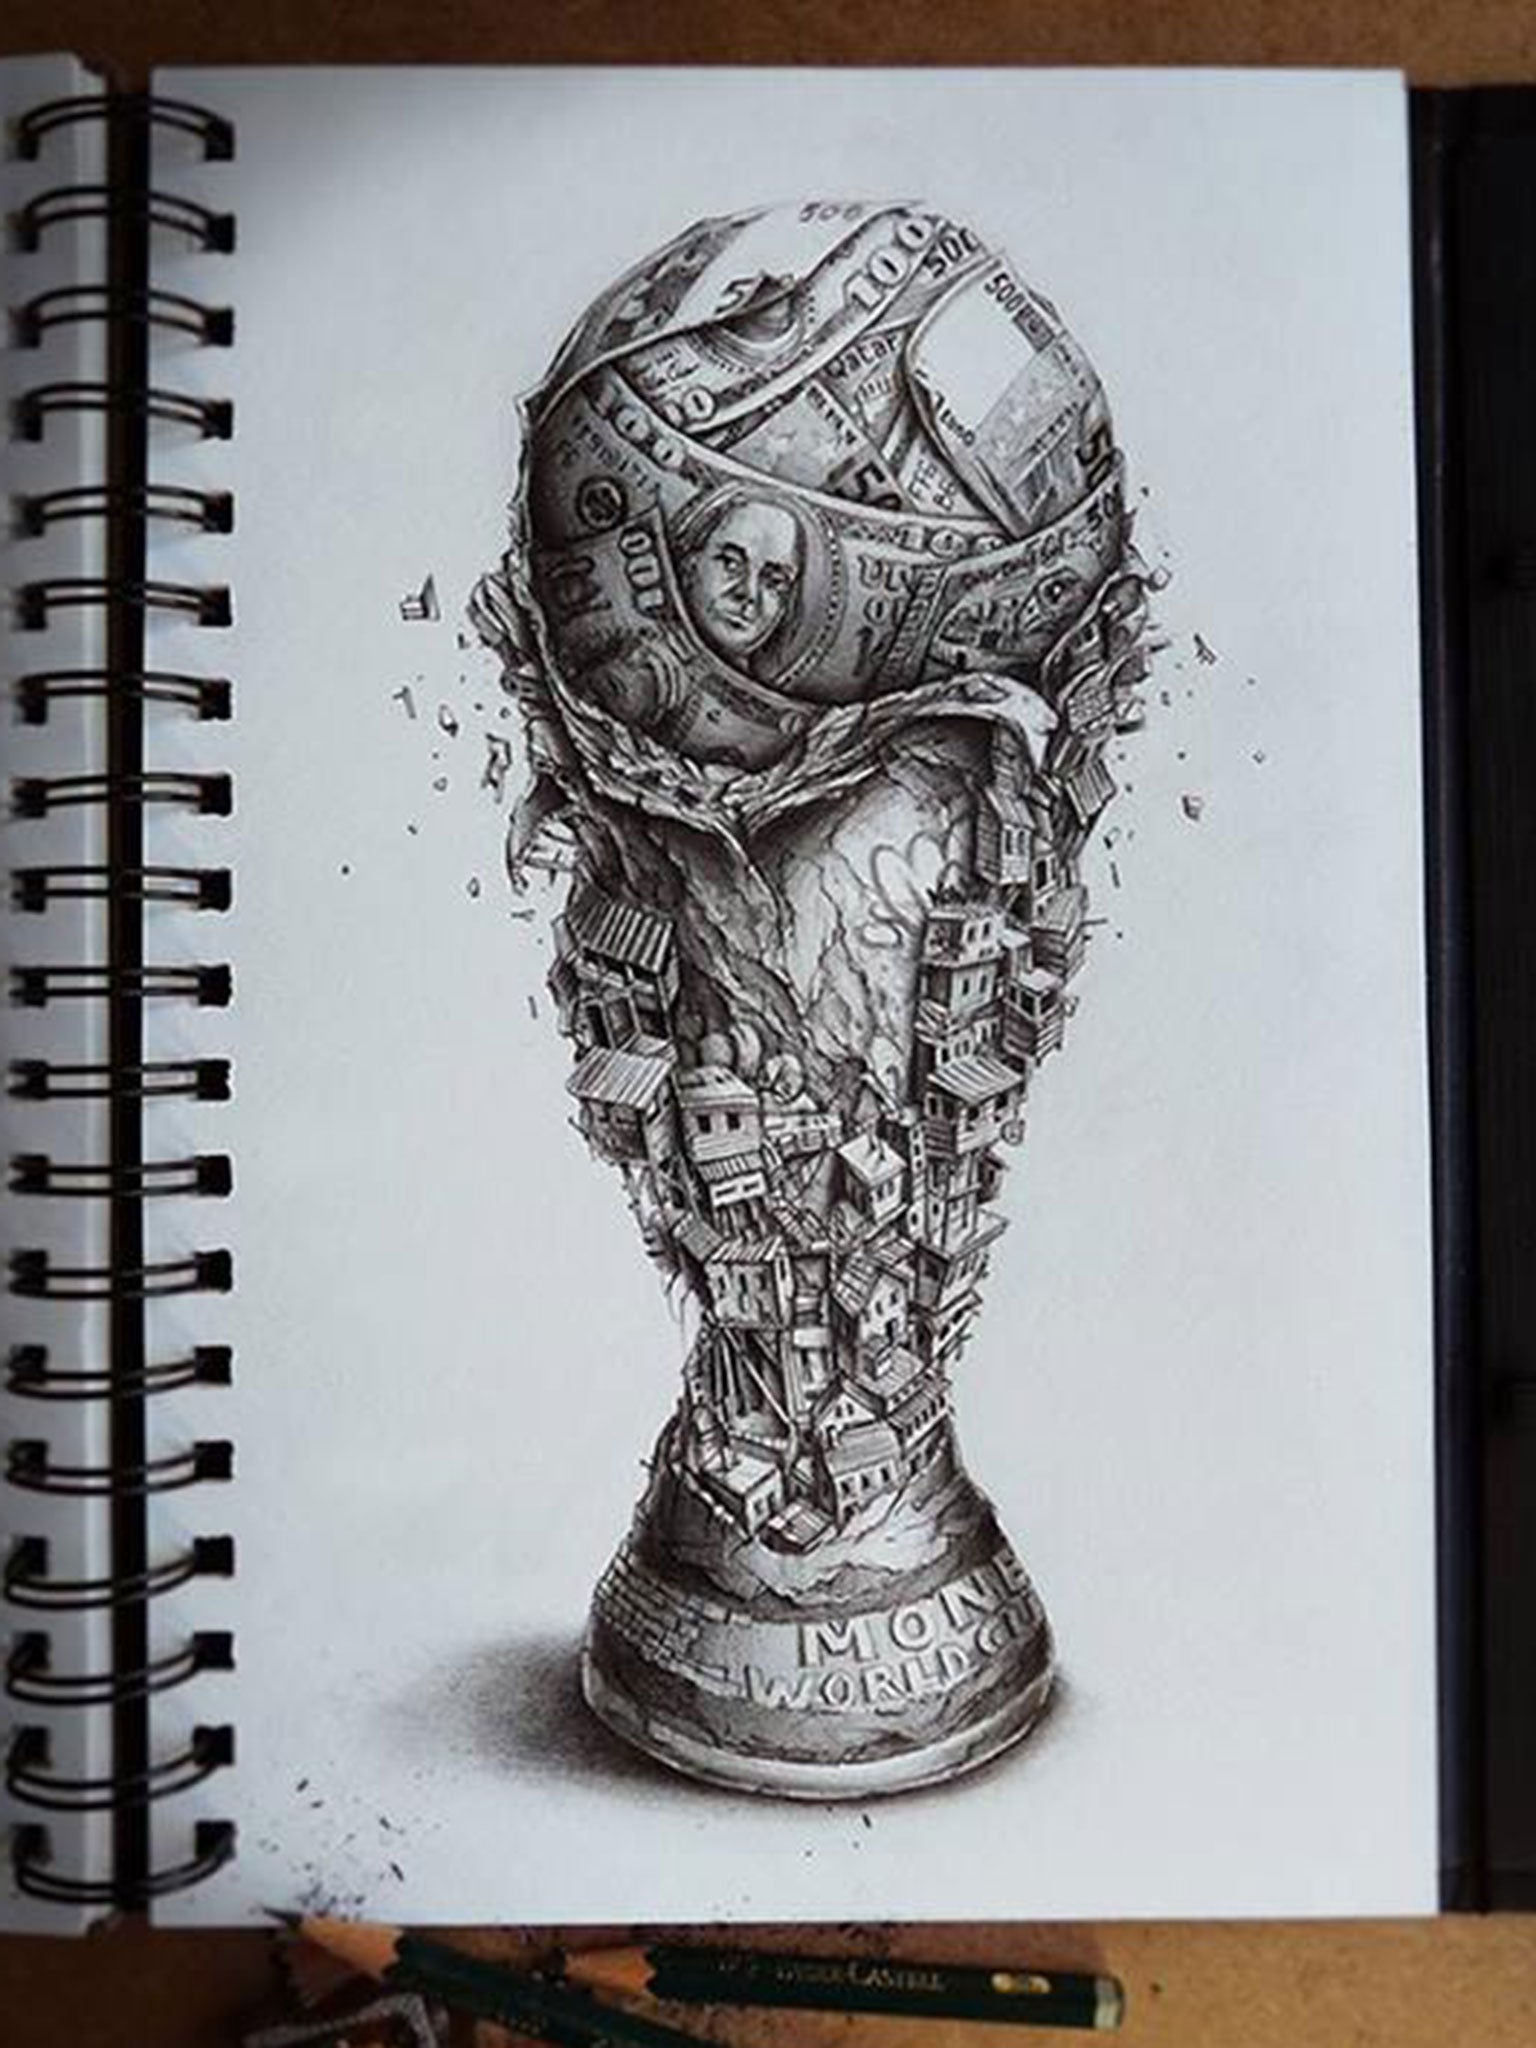 French artist Pez's sketch of the World Cup highlights the political tensions surrounding the celebrations in Brazil